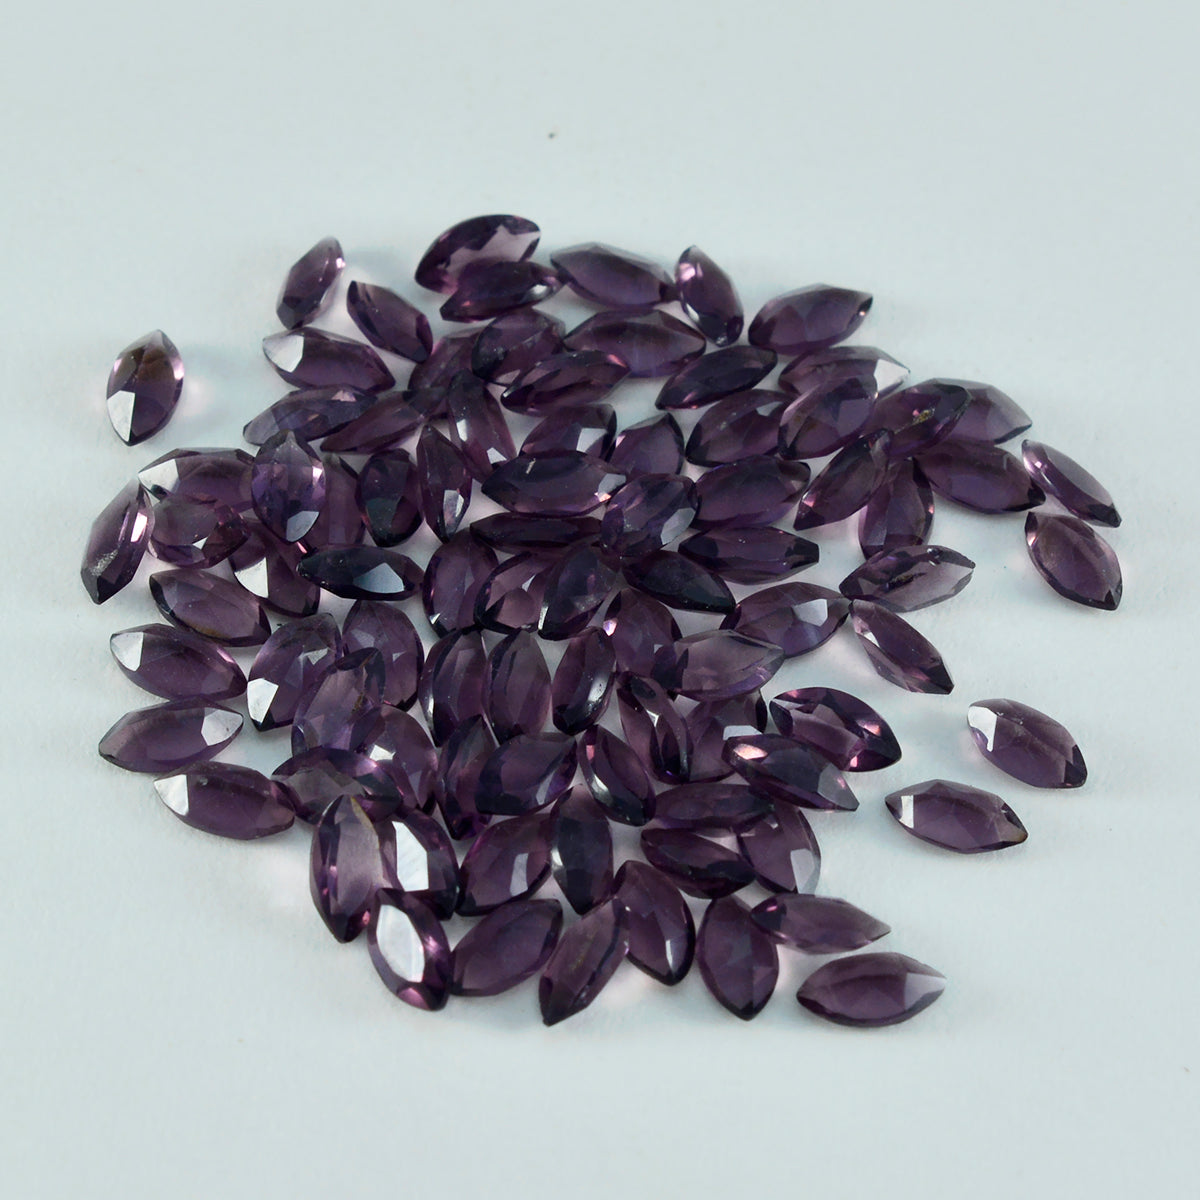 Riyogems 1PC Purple Amethyst CZ Faceted 3x6 mm Marquise Shape attractive Quality Loose Stone